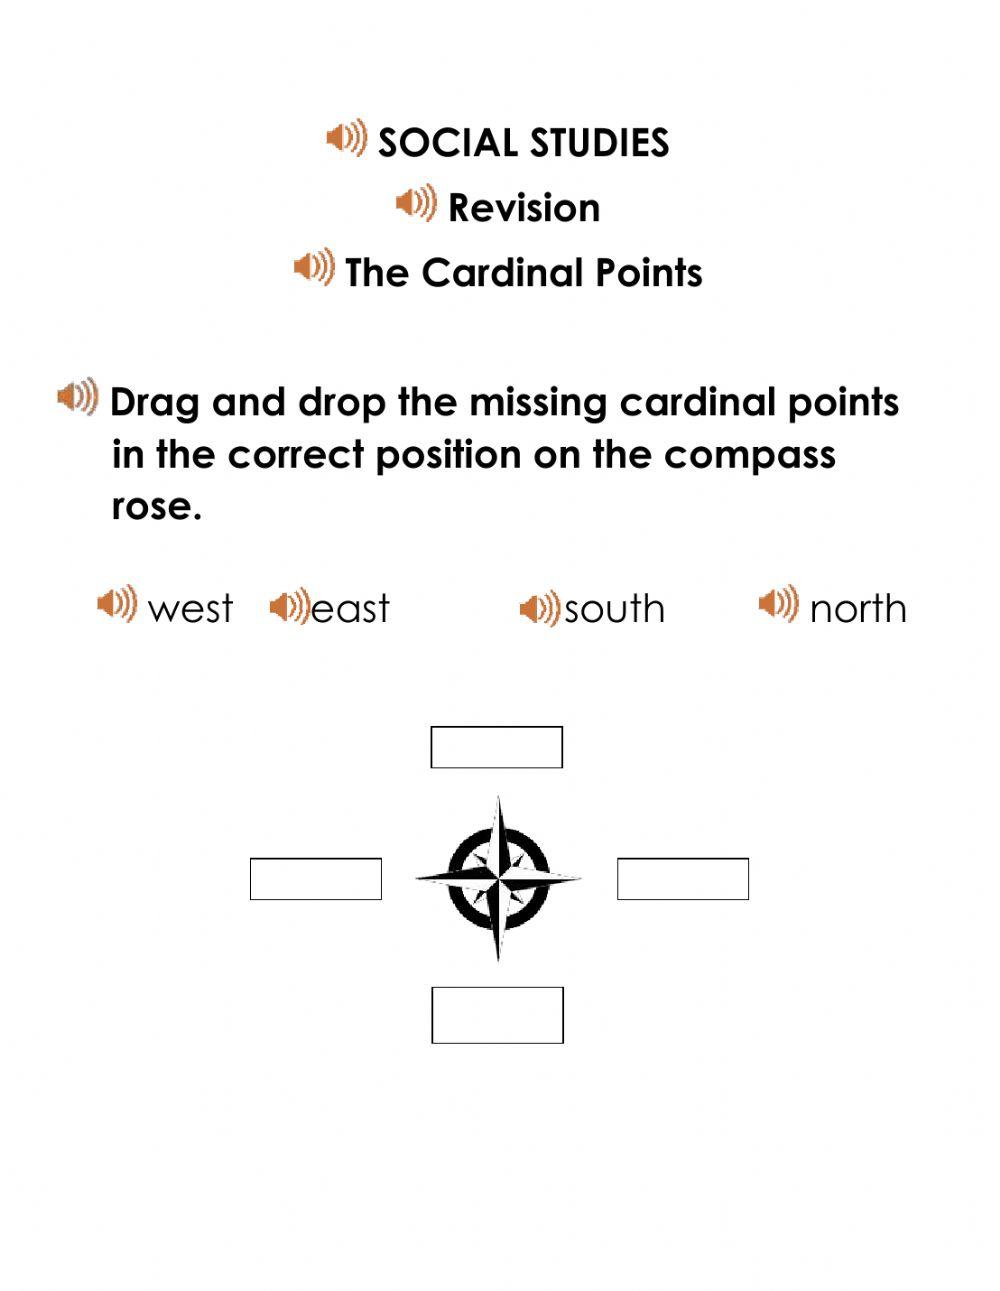 The Cardinal Points